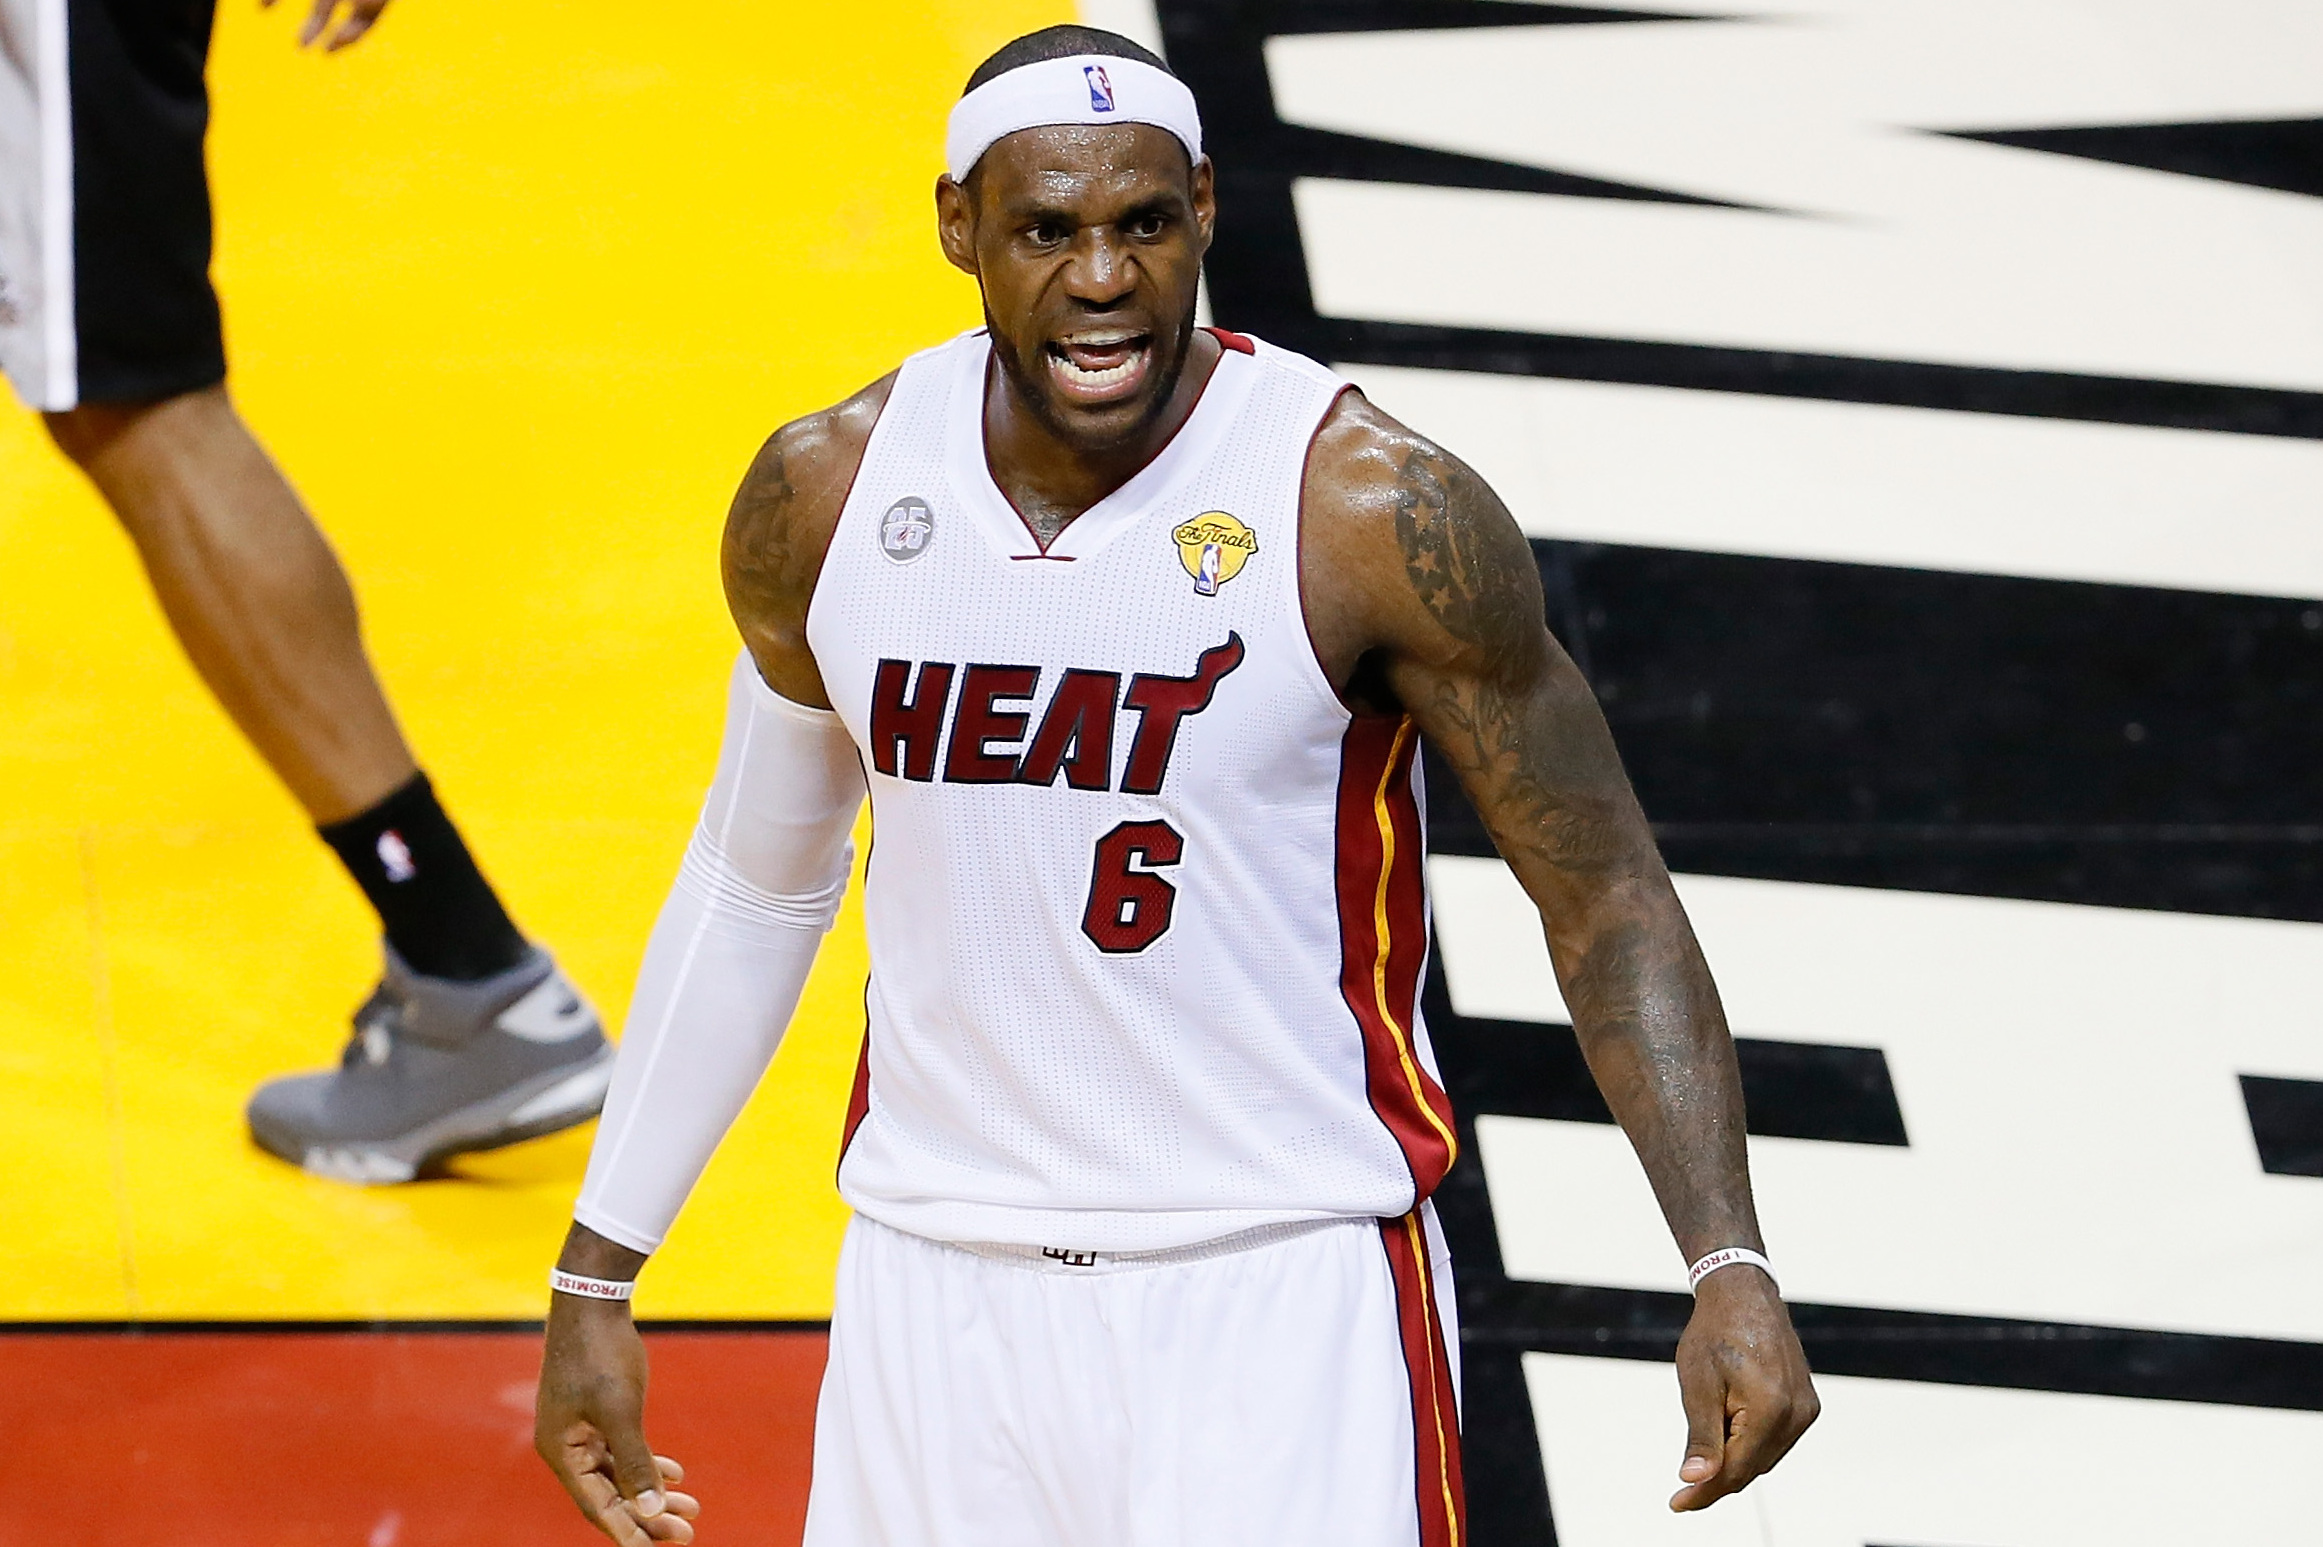 Our Favorite Moments From The 2013 Miami Heat Championship Season